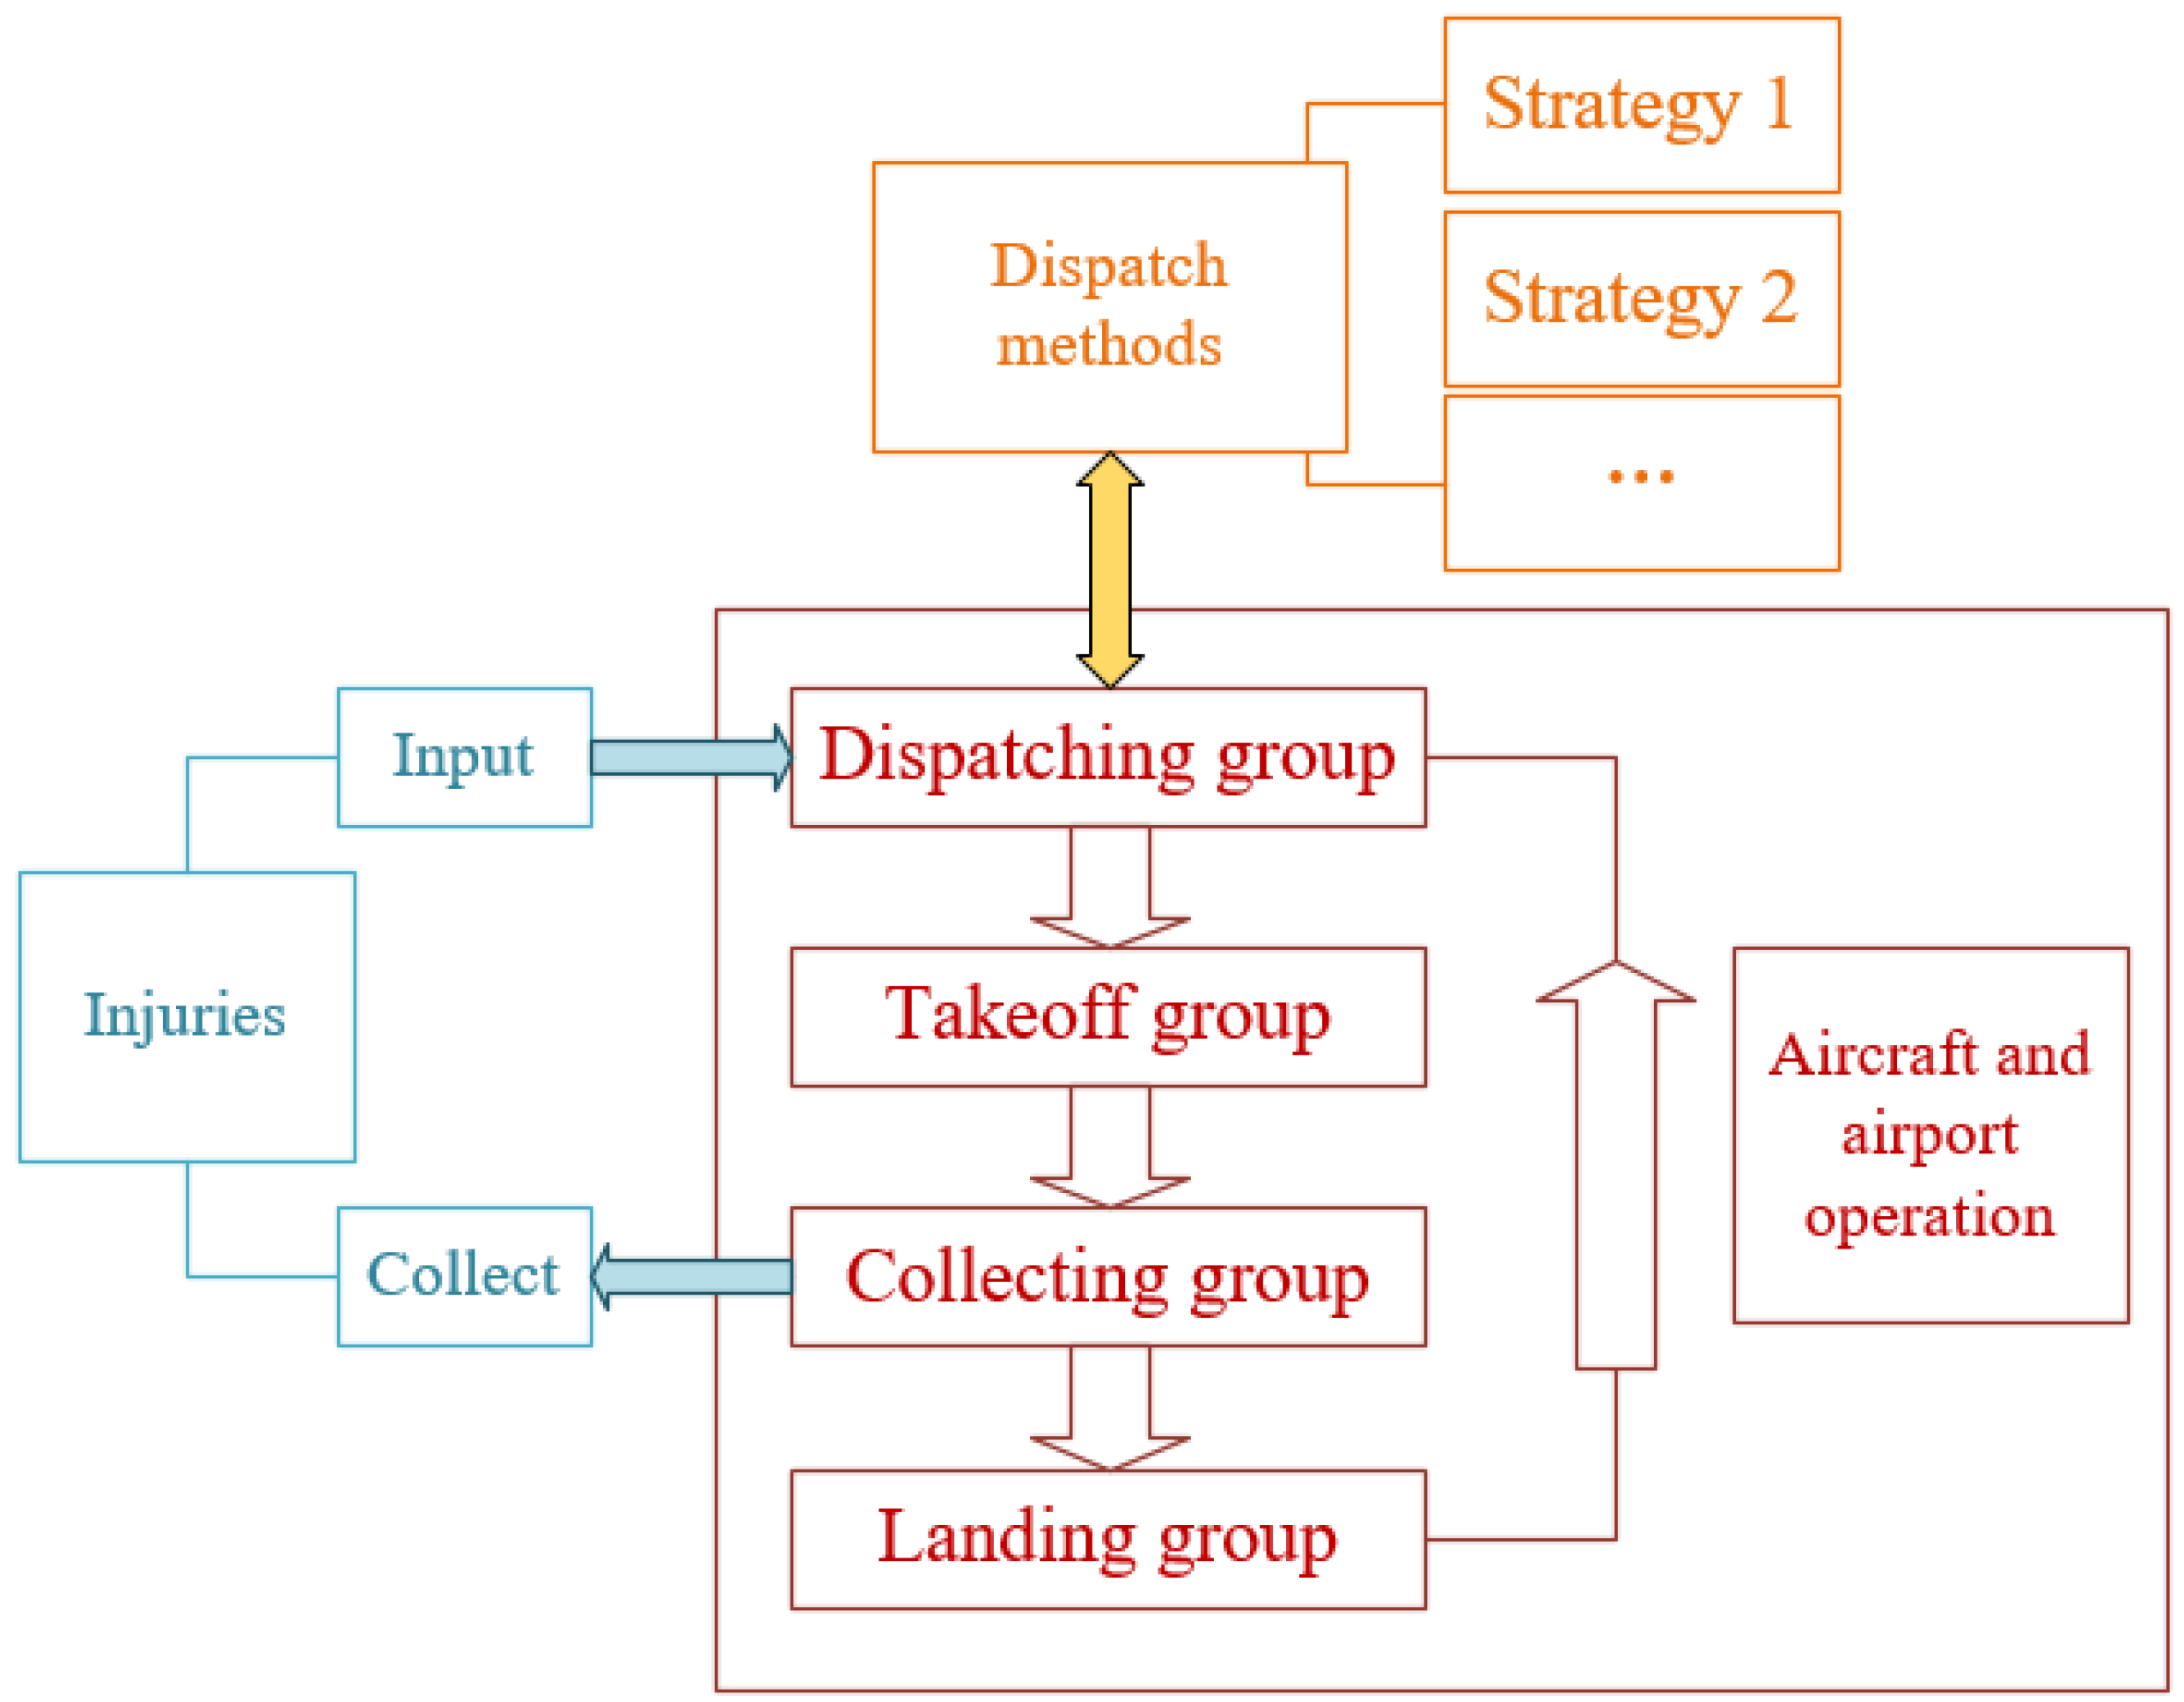 Framework for aircraft dispatch decision support.